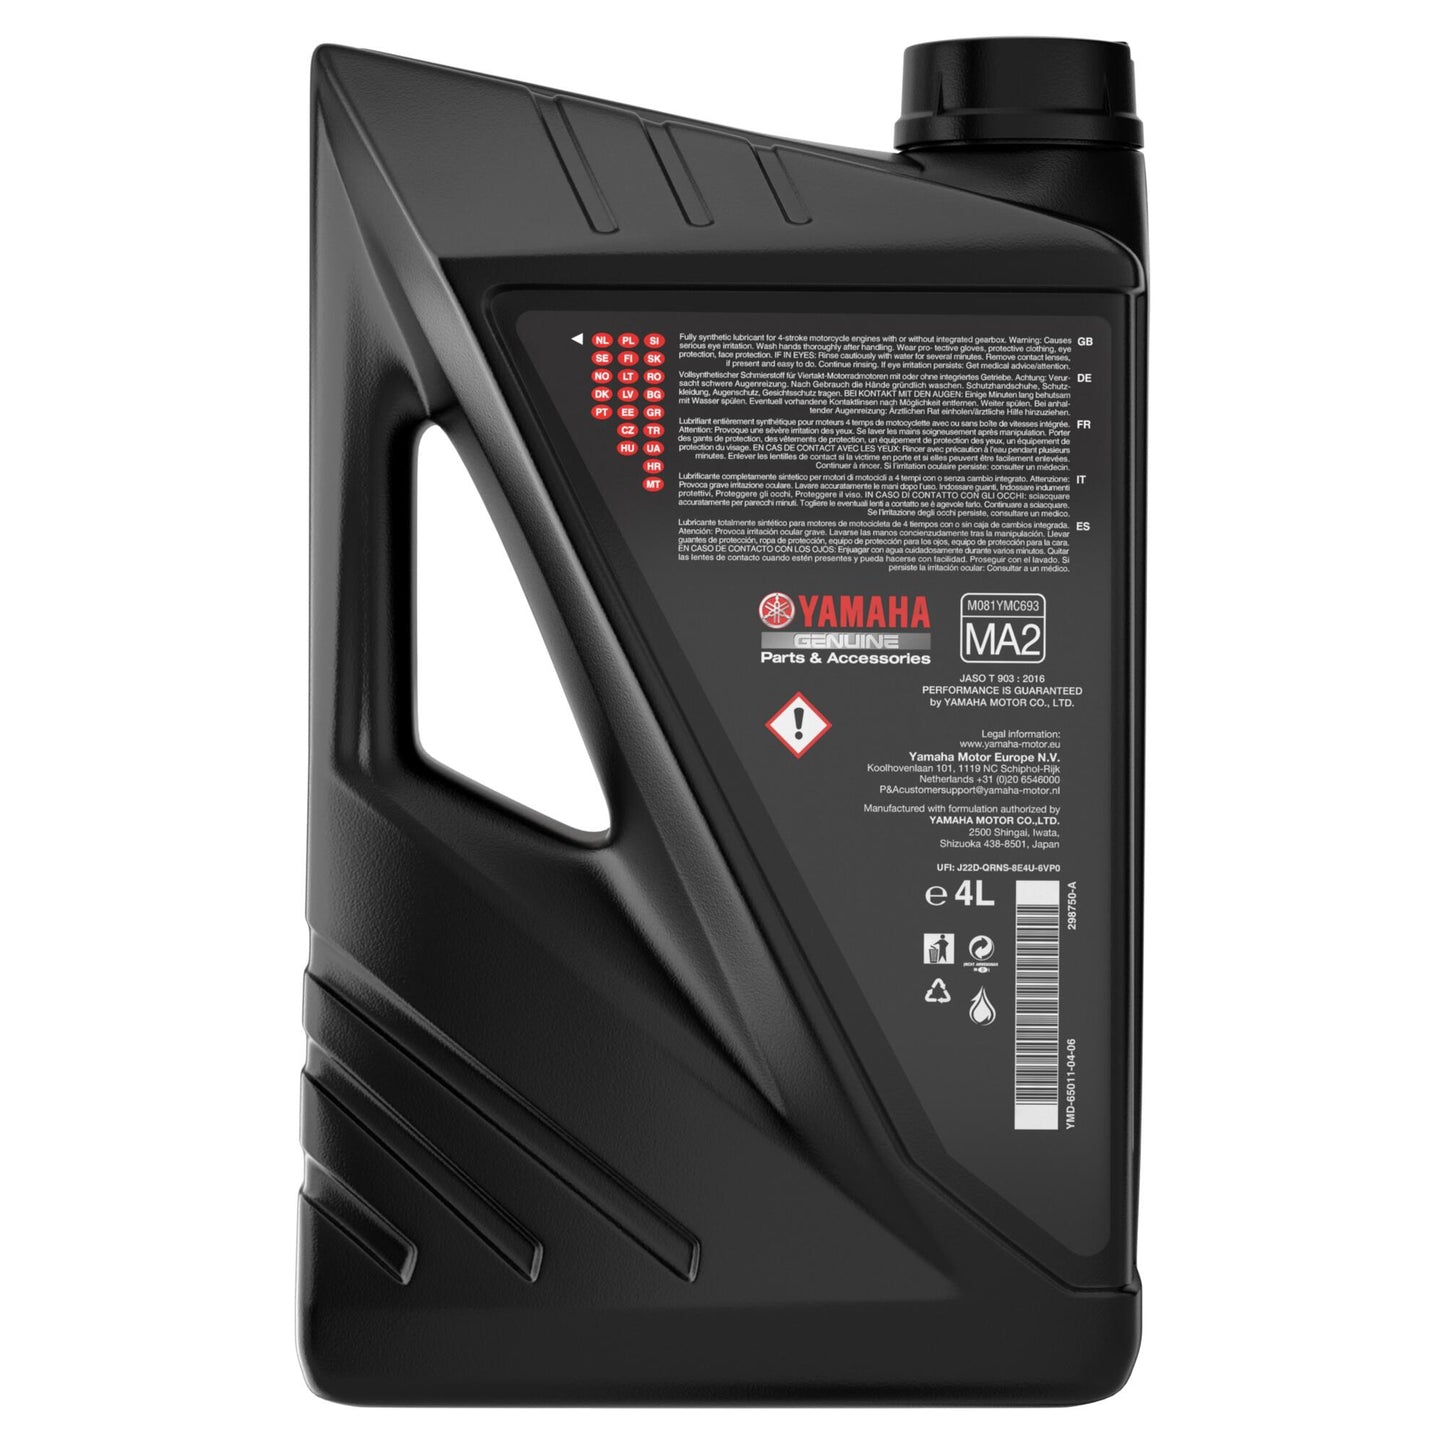 Yamalube Fully-Synthetic 10W40 Oil - 4 Litre